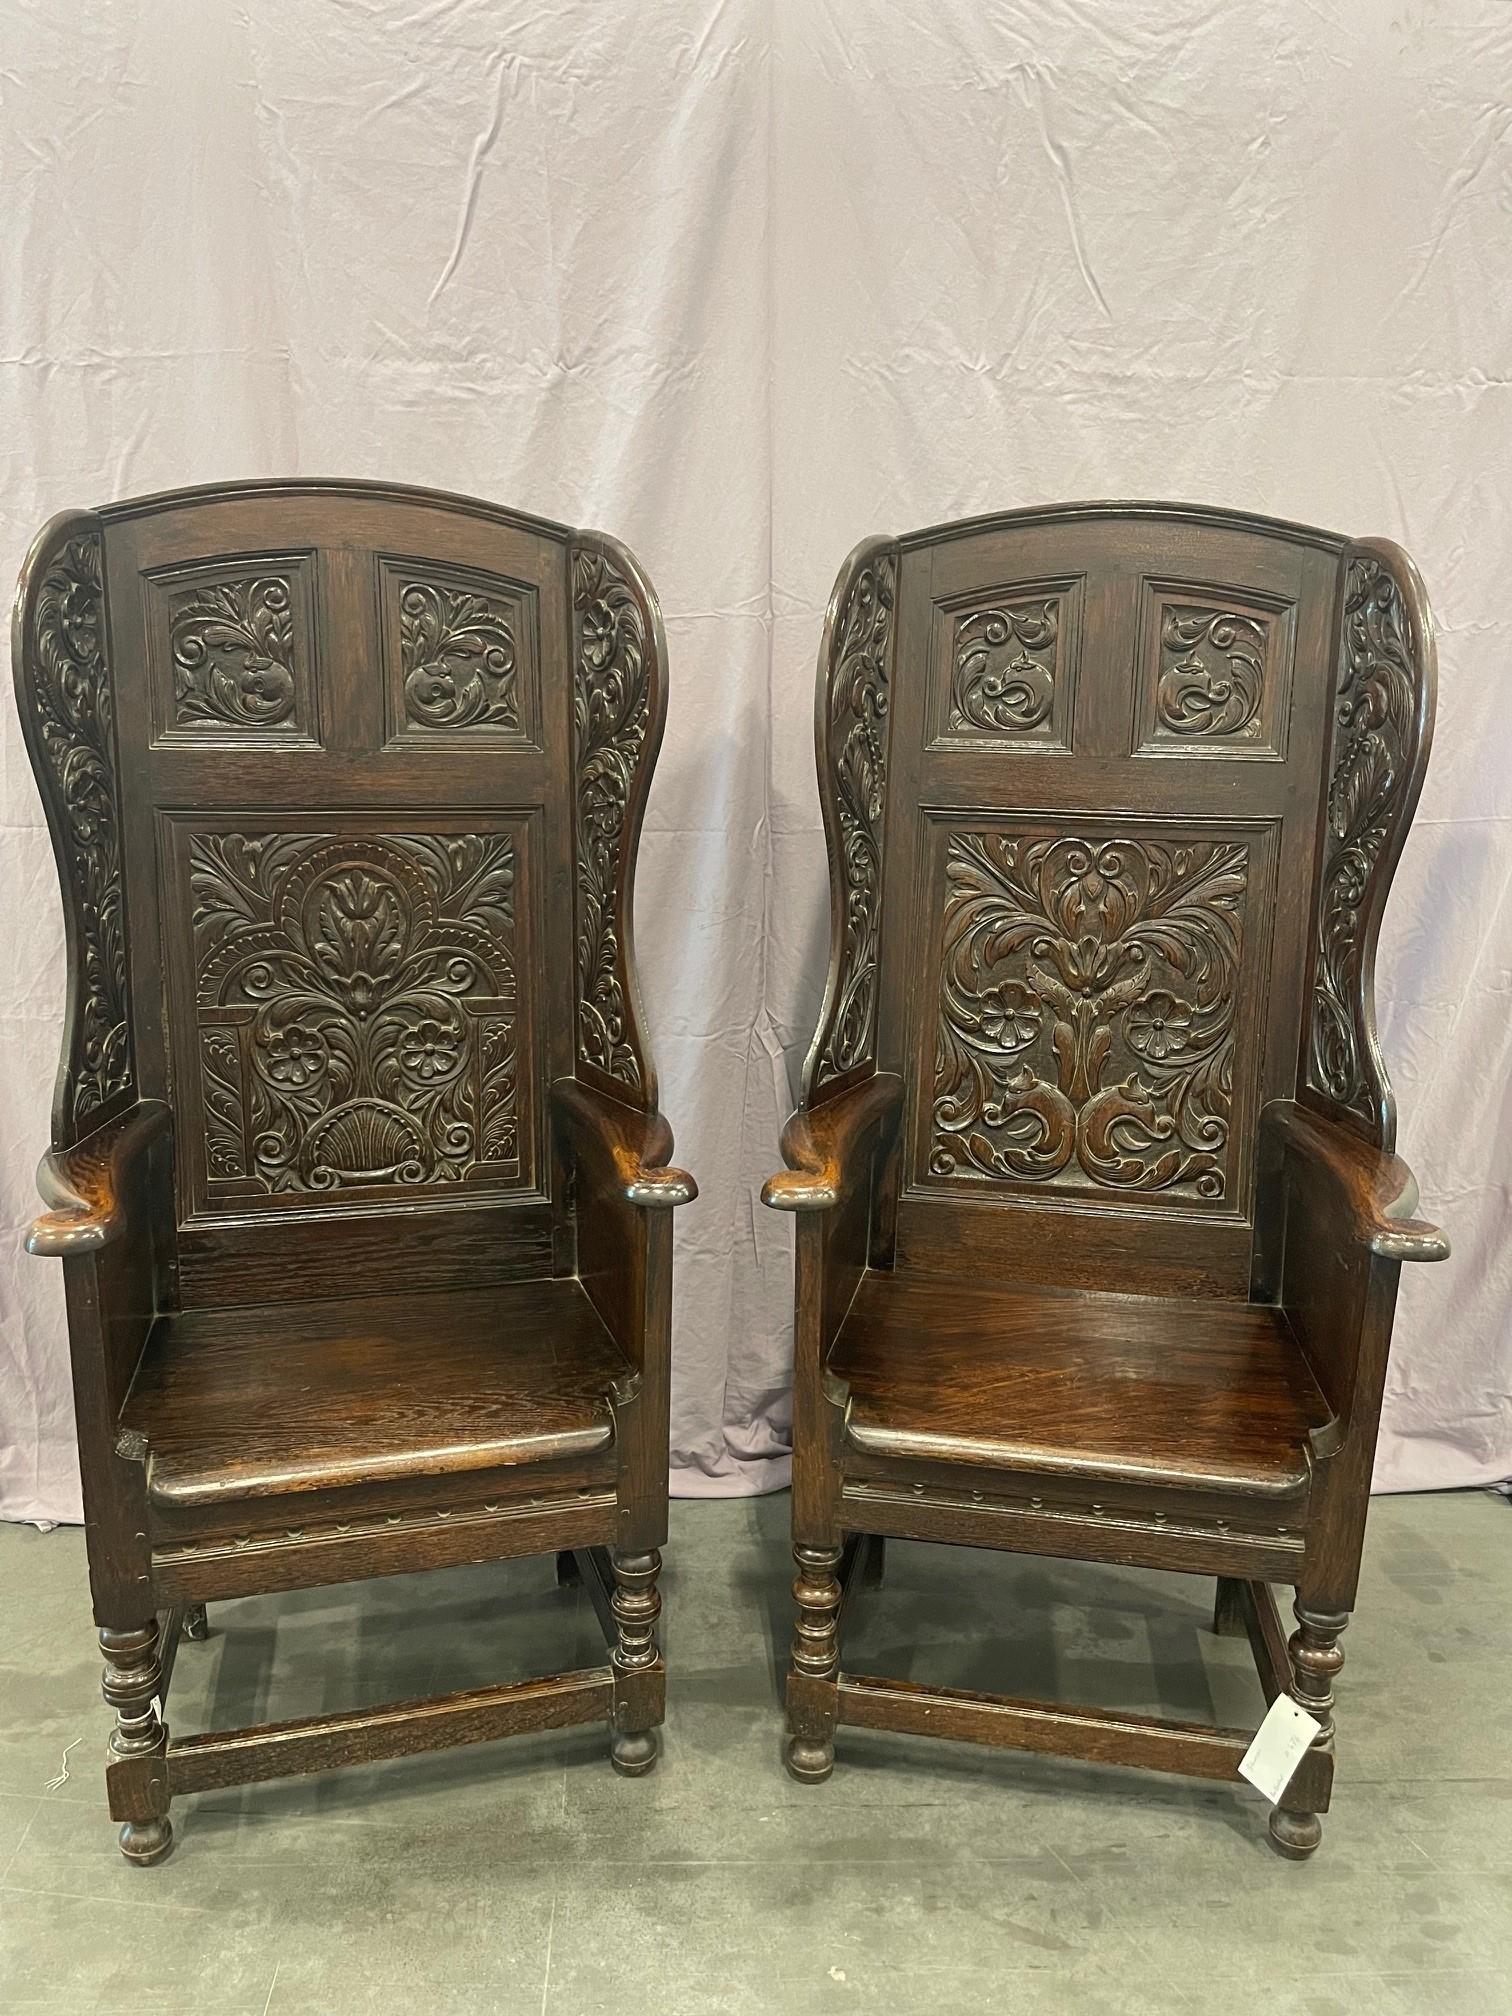 A lovely pair of heavily carved Victorian oak wing back armchairs. These chairs have intricate carvings on the back panels, side wings and exterior sides panels all done in the style of the 17th. Circa 1850

Provenance: These were acquired from “The